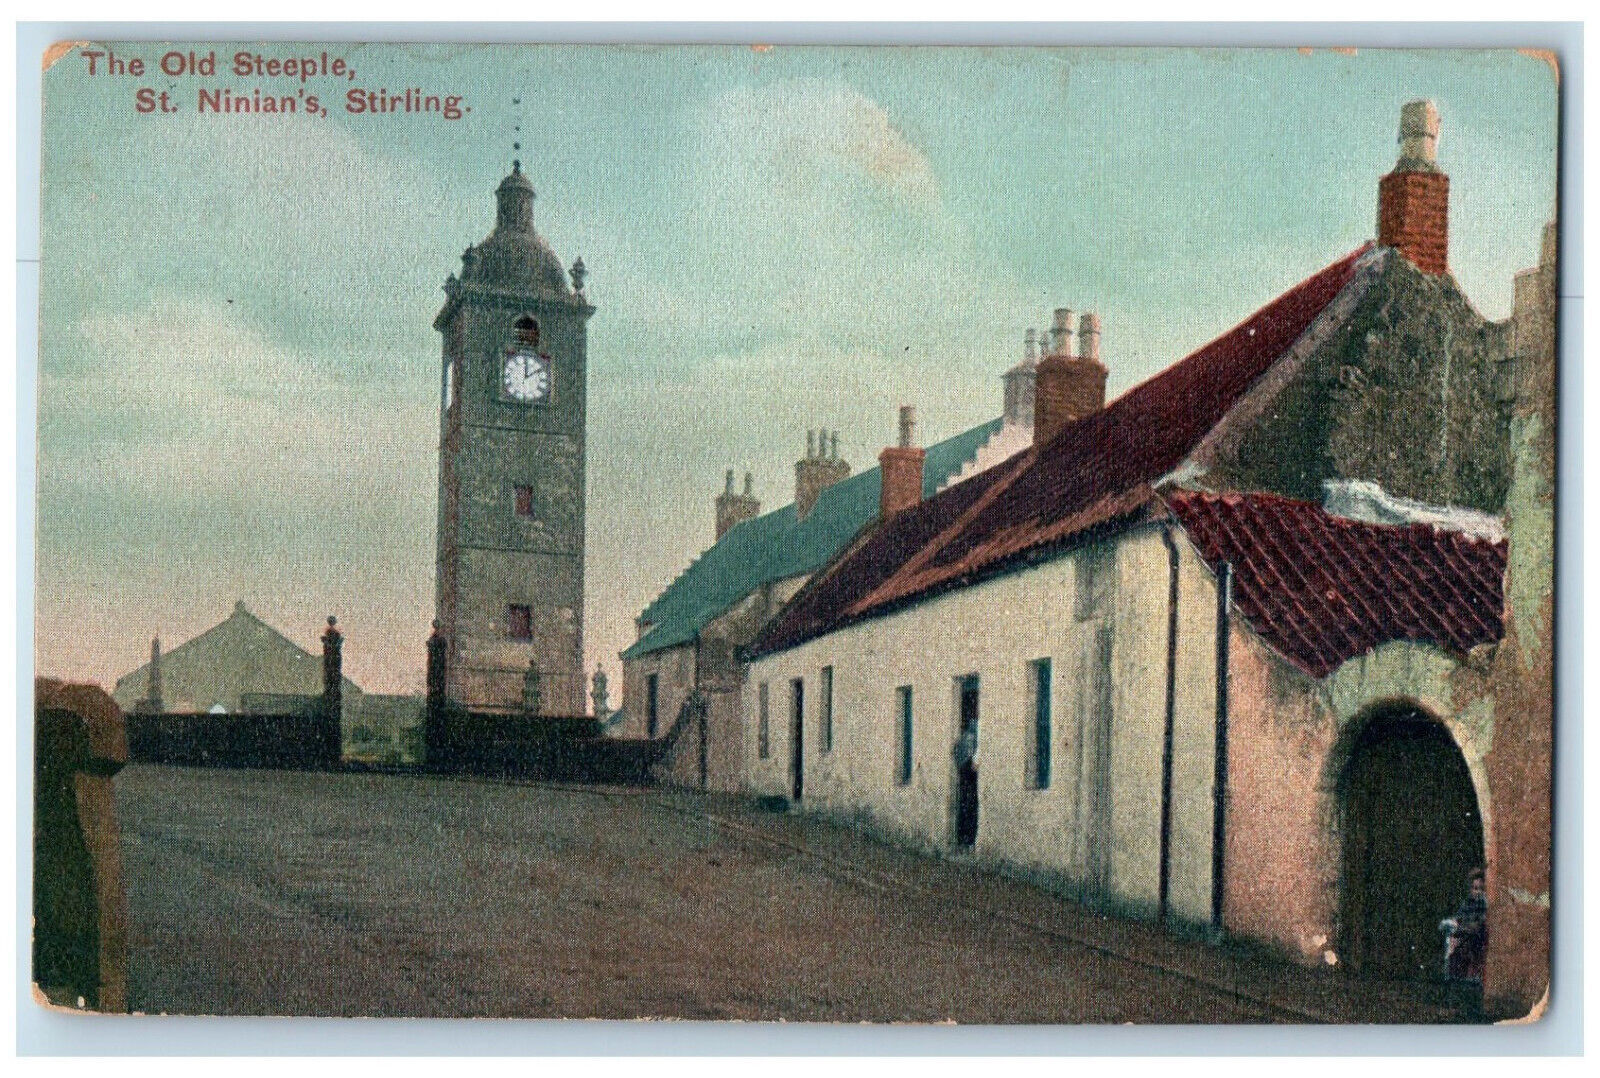 The Old Steeple